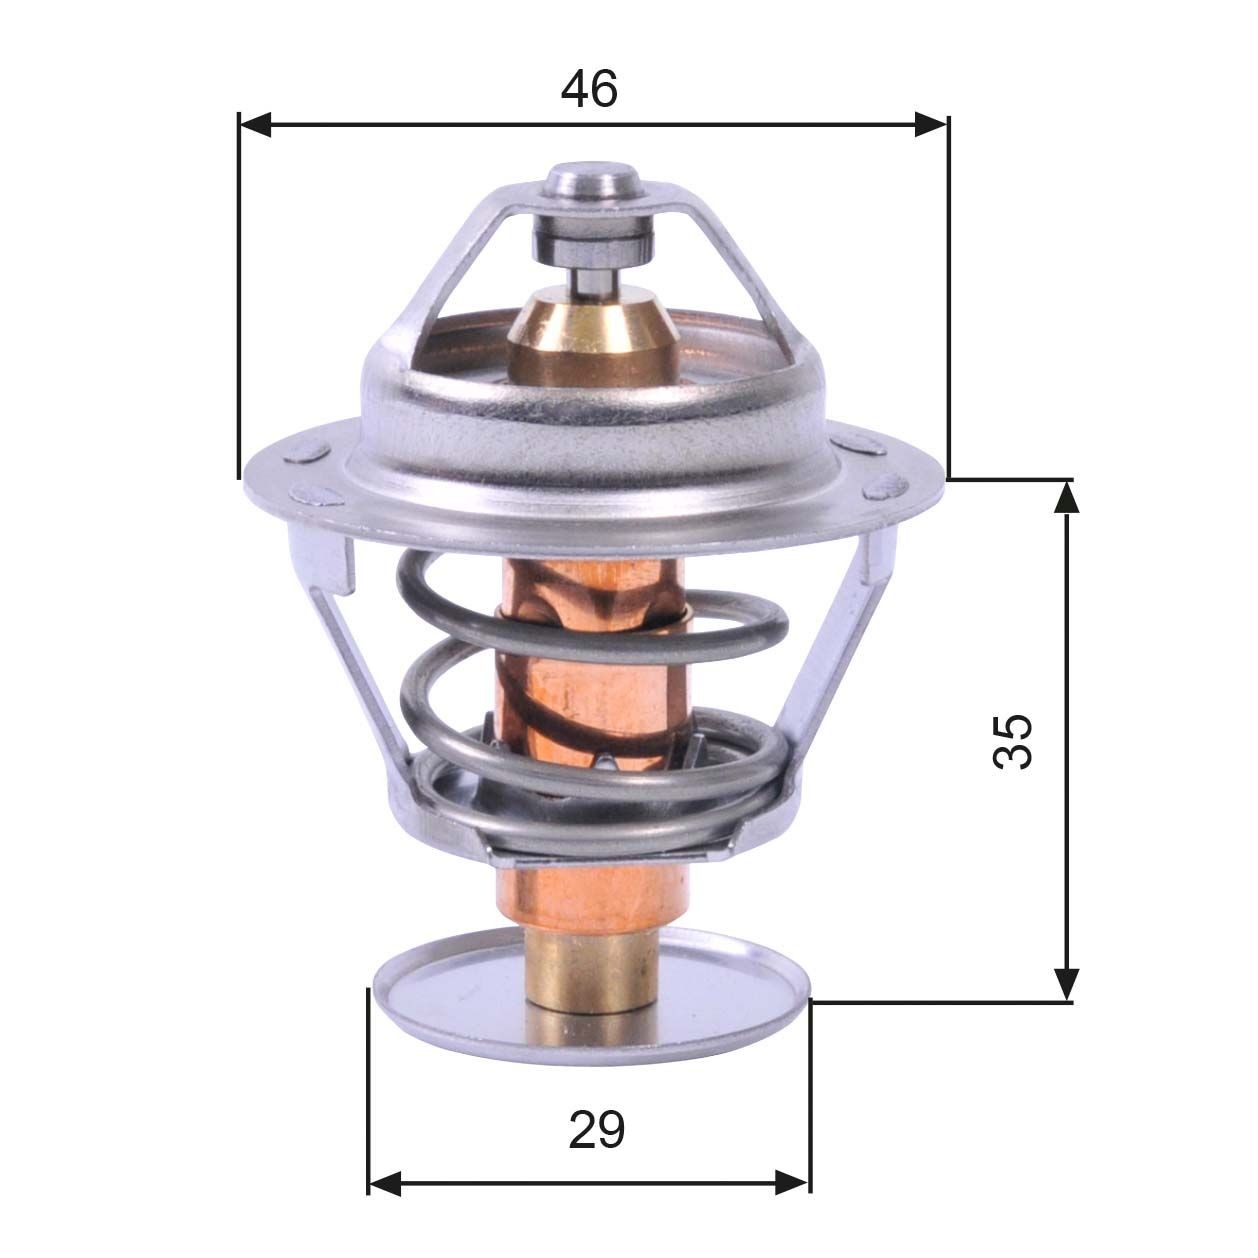 GATES TH10489G1 Engine thermostat Opening Temperature: 89°C, with gaskets/seals, without housing